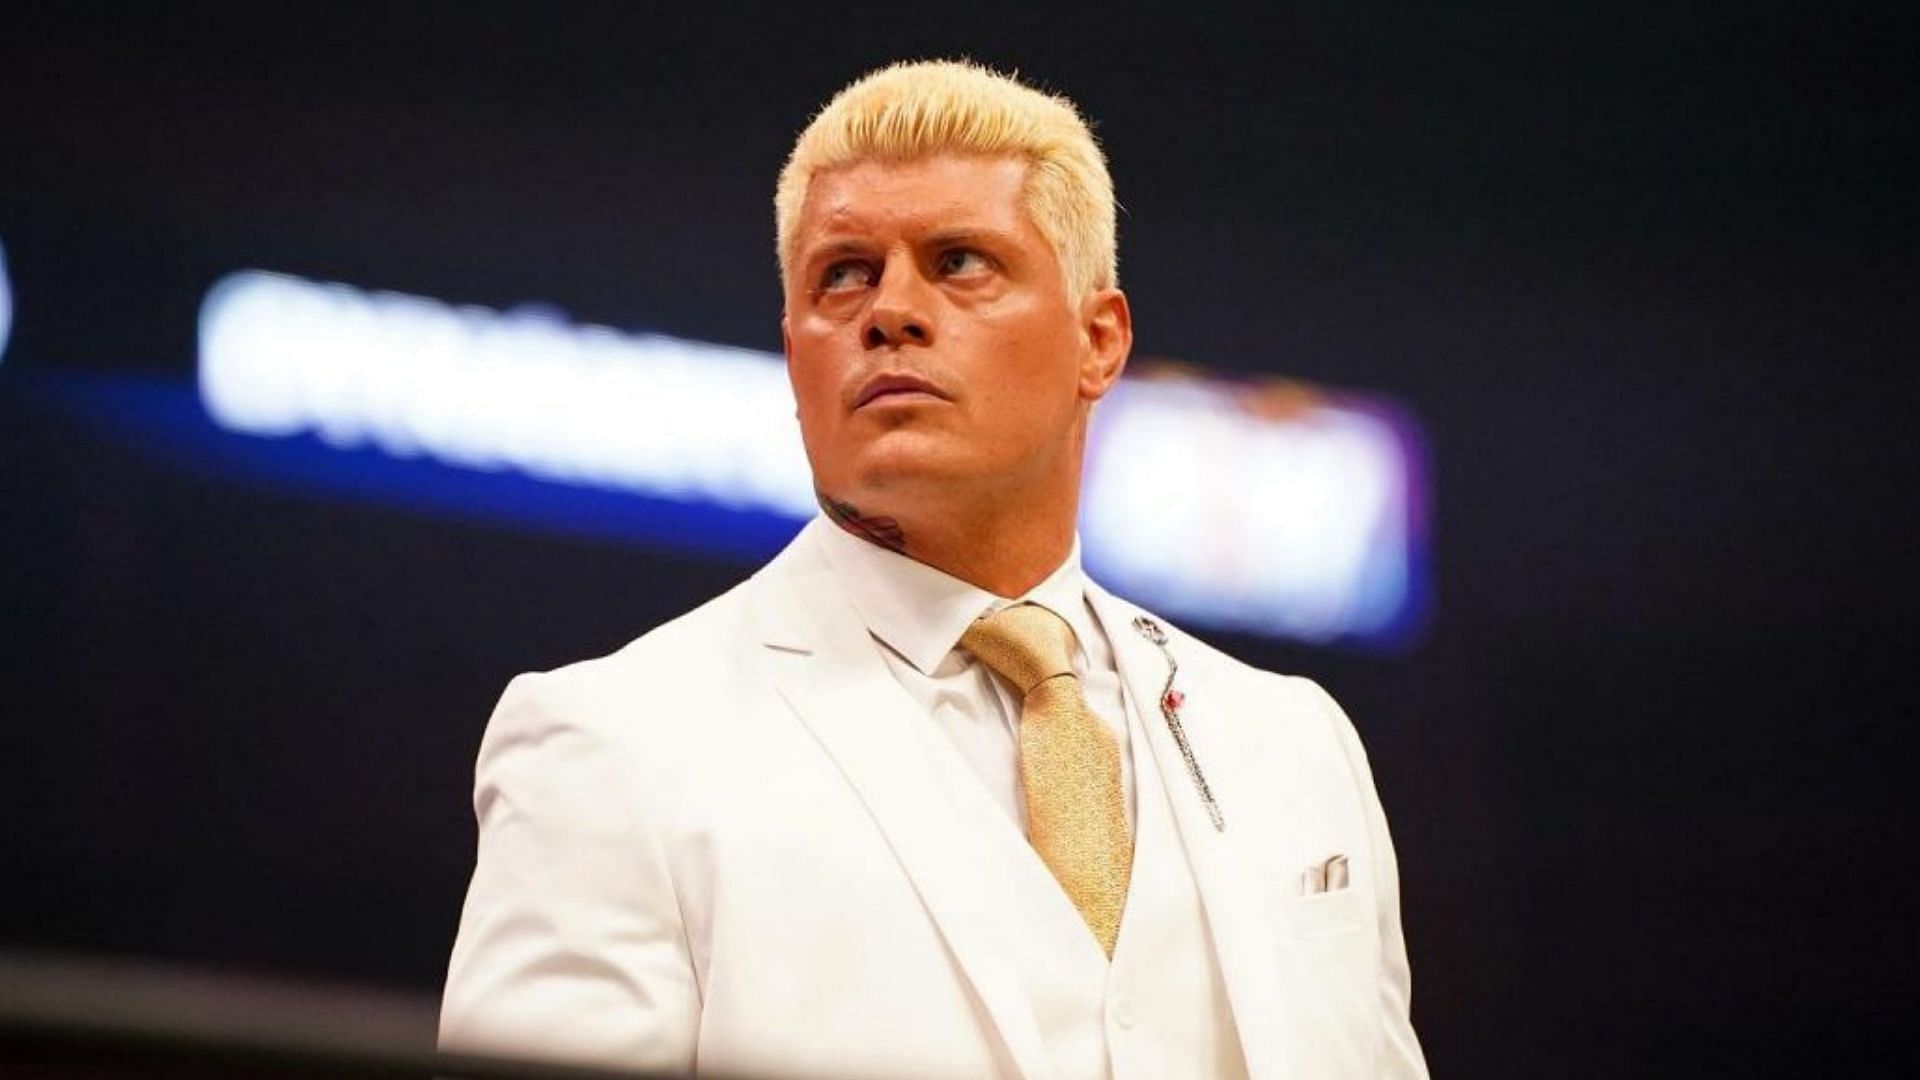 Cody Rhodes looks set to rejoin WWE in the near future